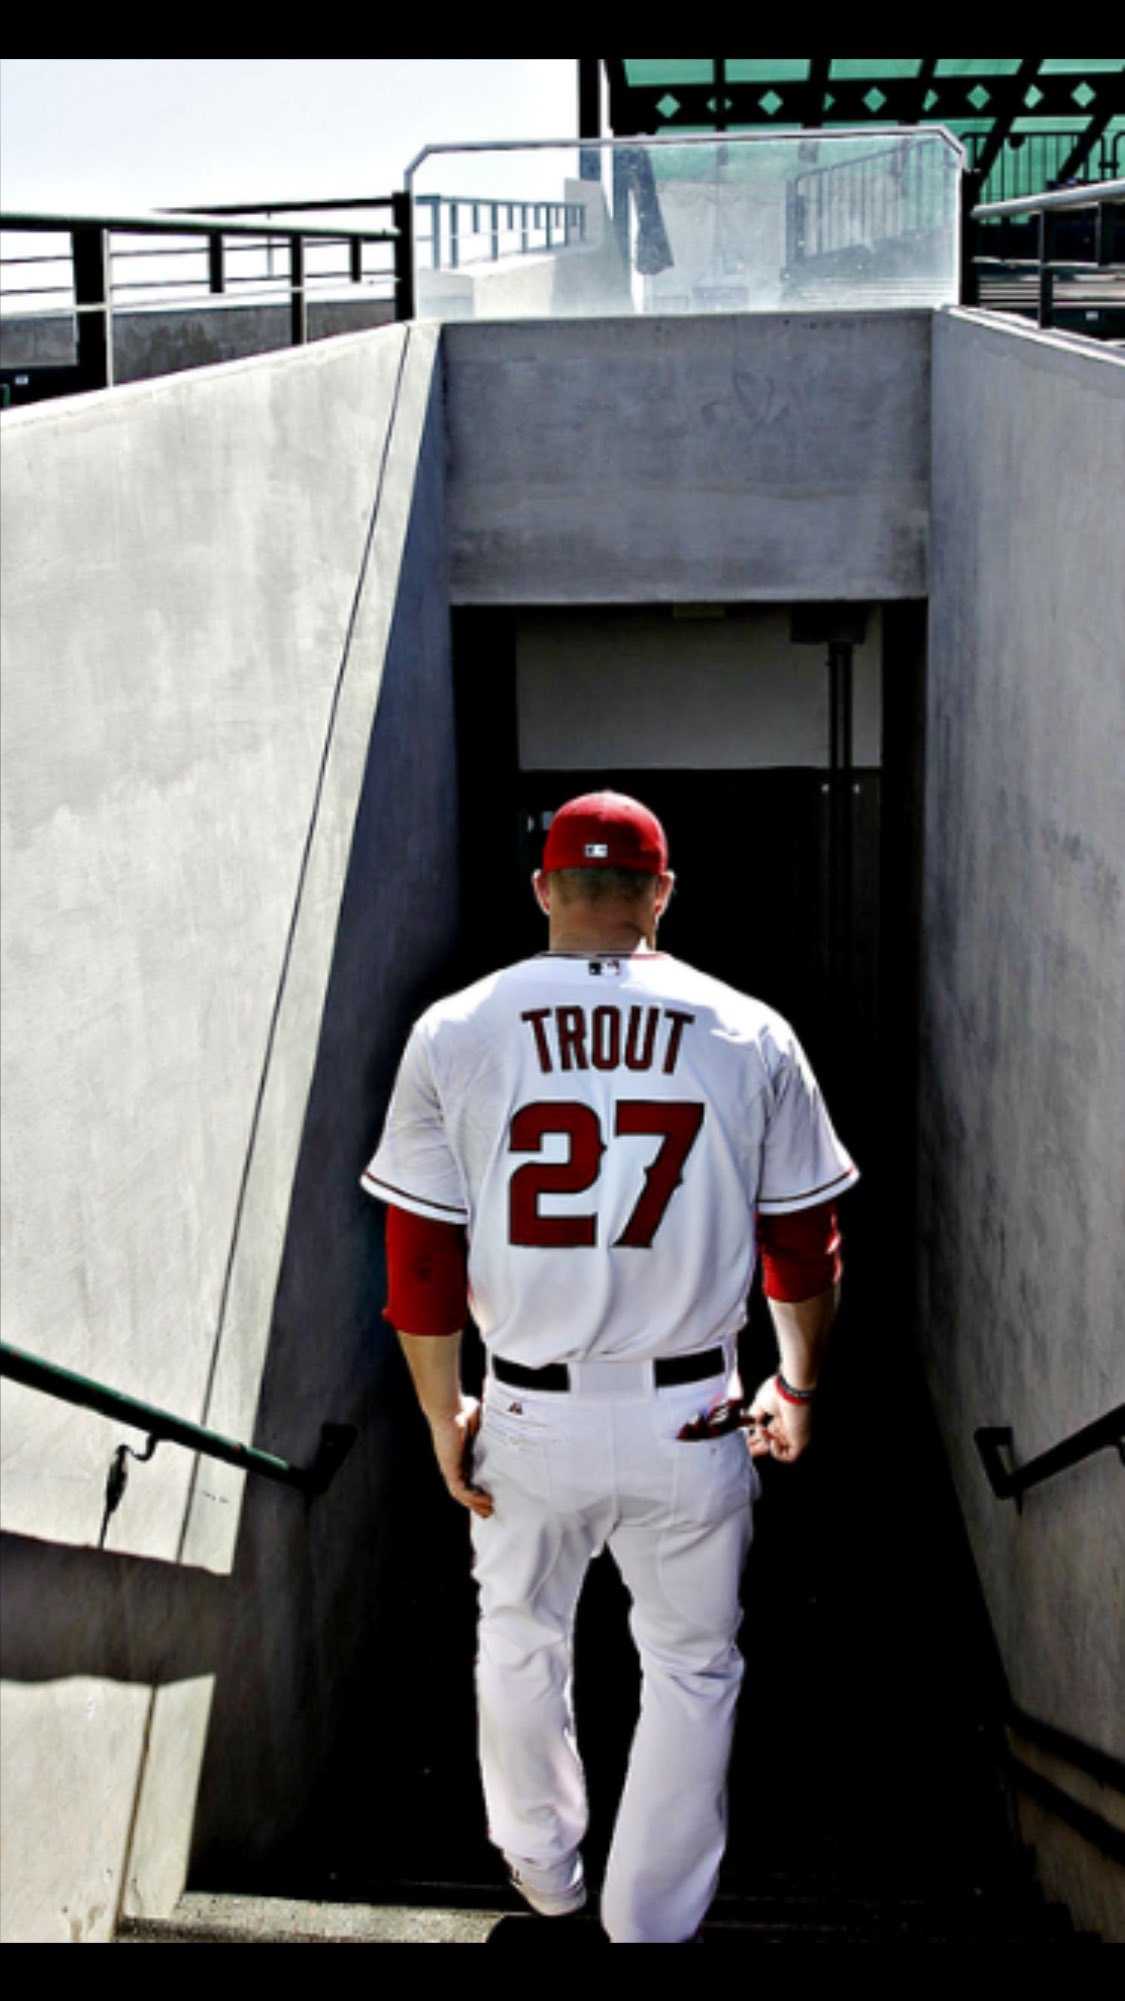 iPhone Mike Trout Wallpaper - KoLPaPer - Awesome Free HD Wallpapers